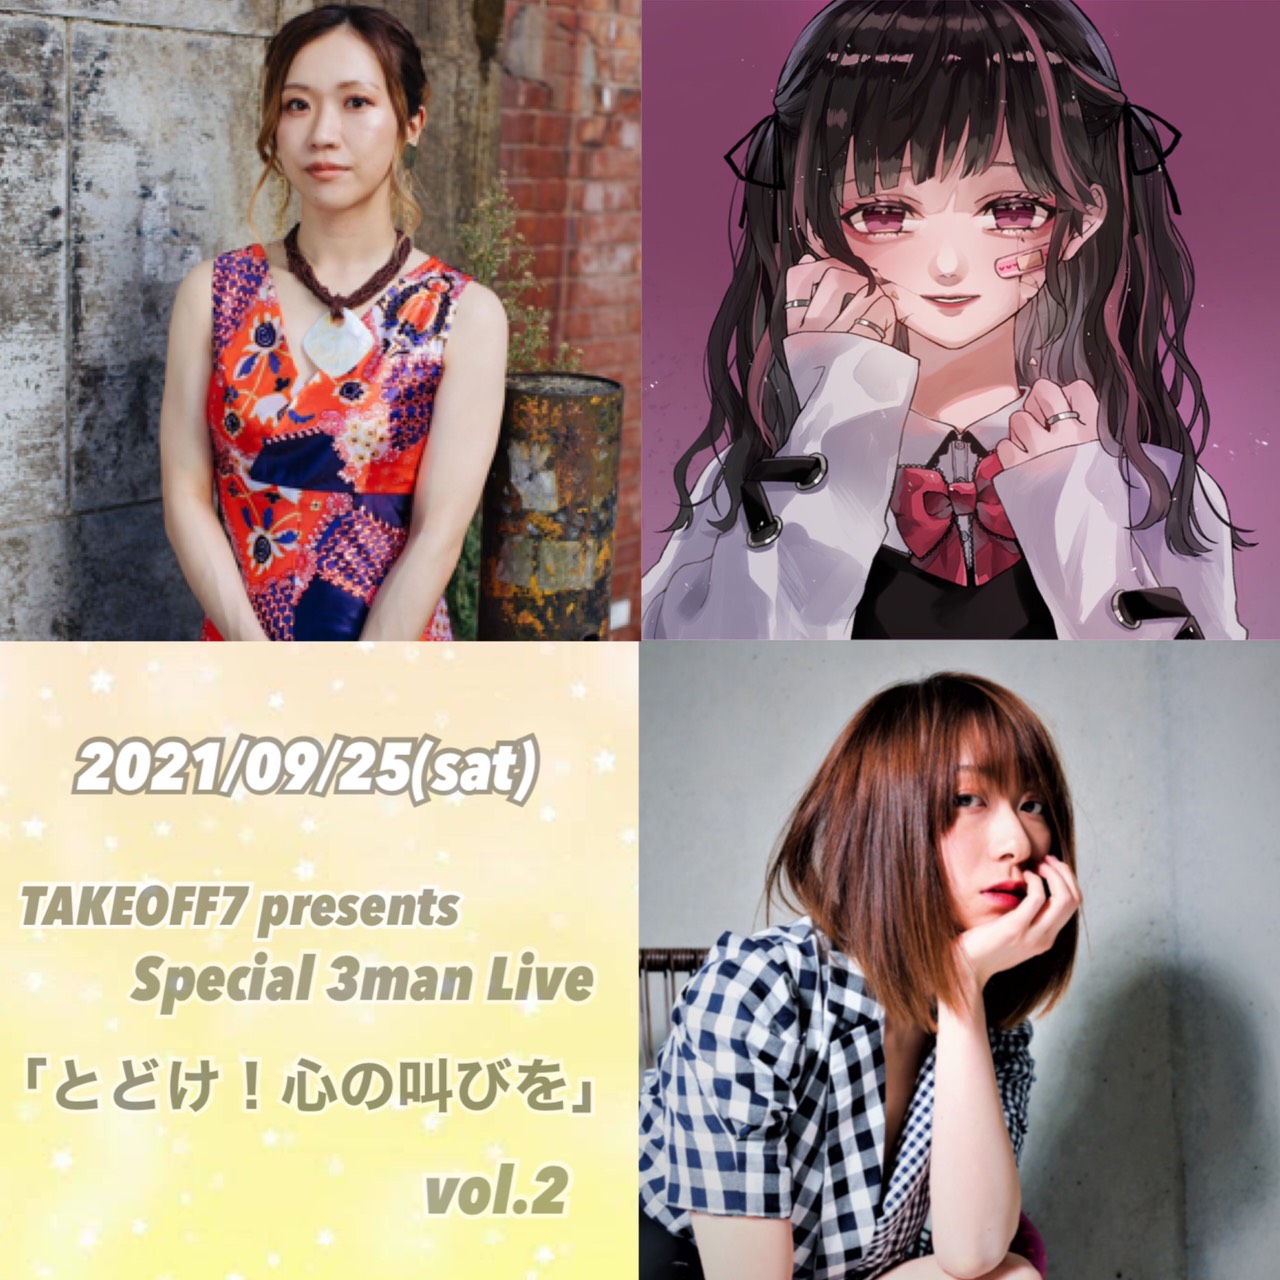 TAKEOFF7 presents Special 3man Live 「とどけ！心の叫びを！」vol.2